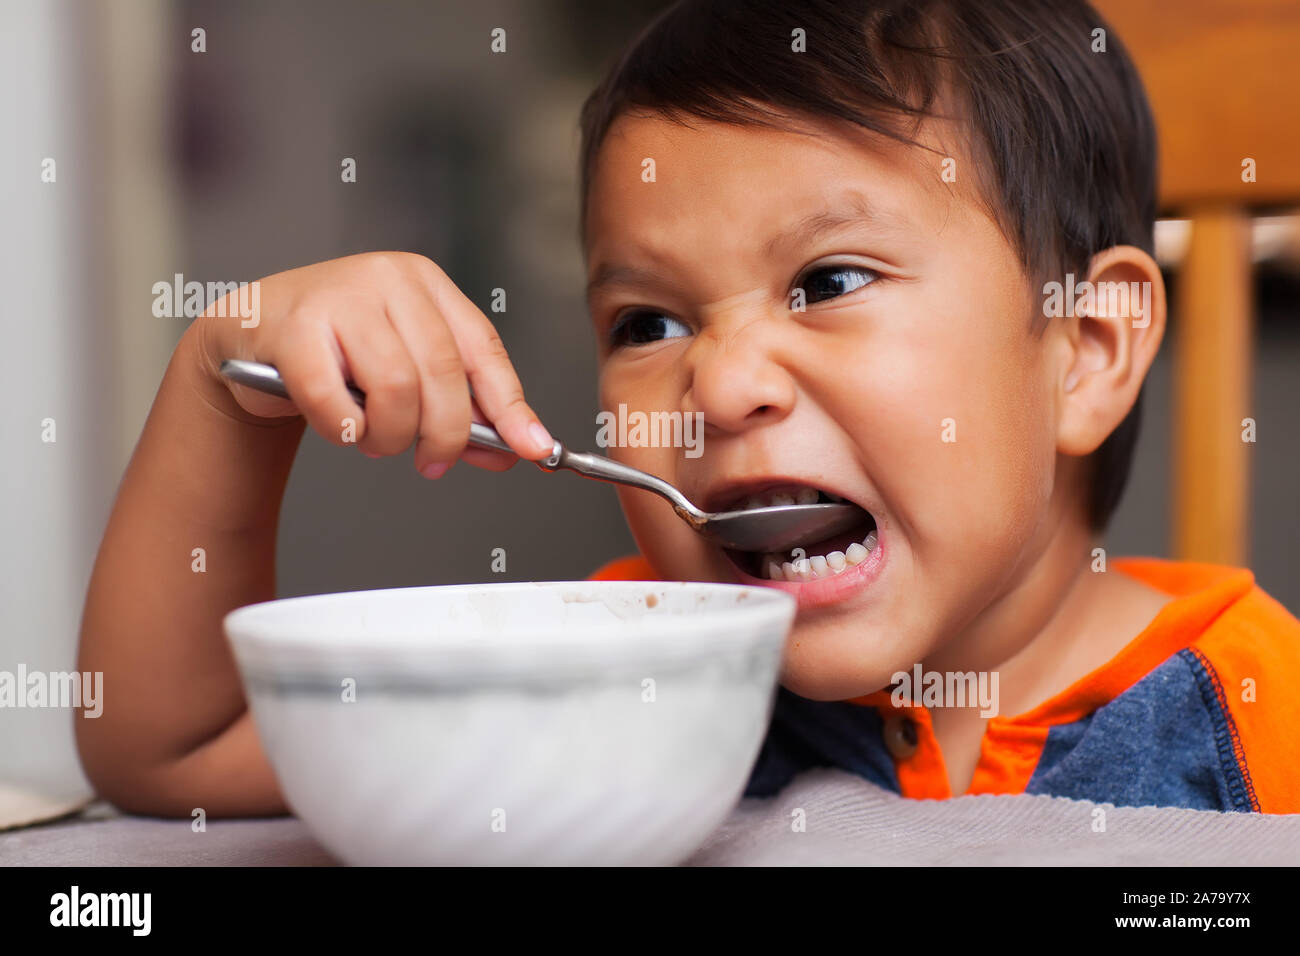 A latino boy taking a bite out of a spoonful of food and sitting unsupported at the dinner table for breakfast. Stock Photo